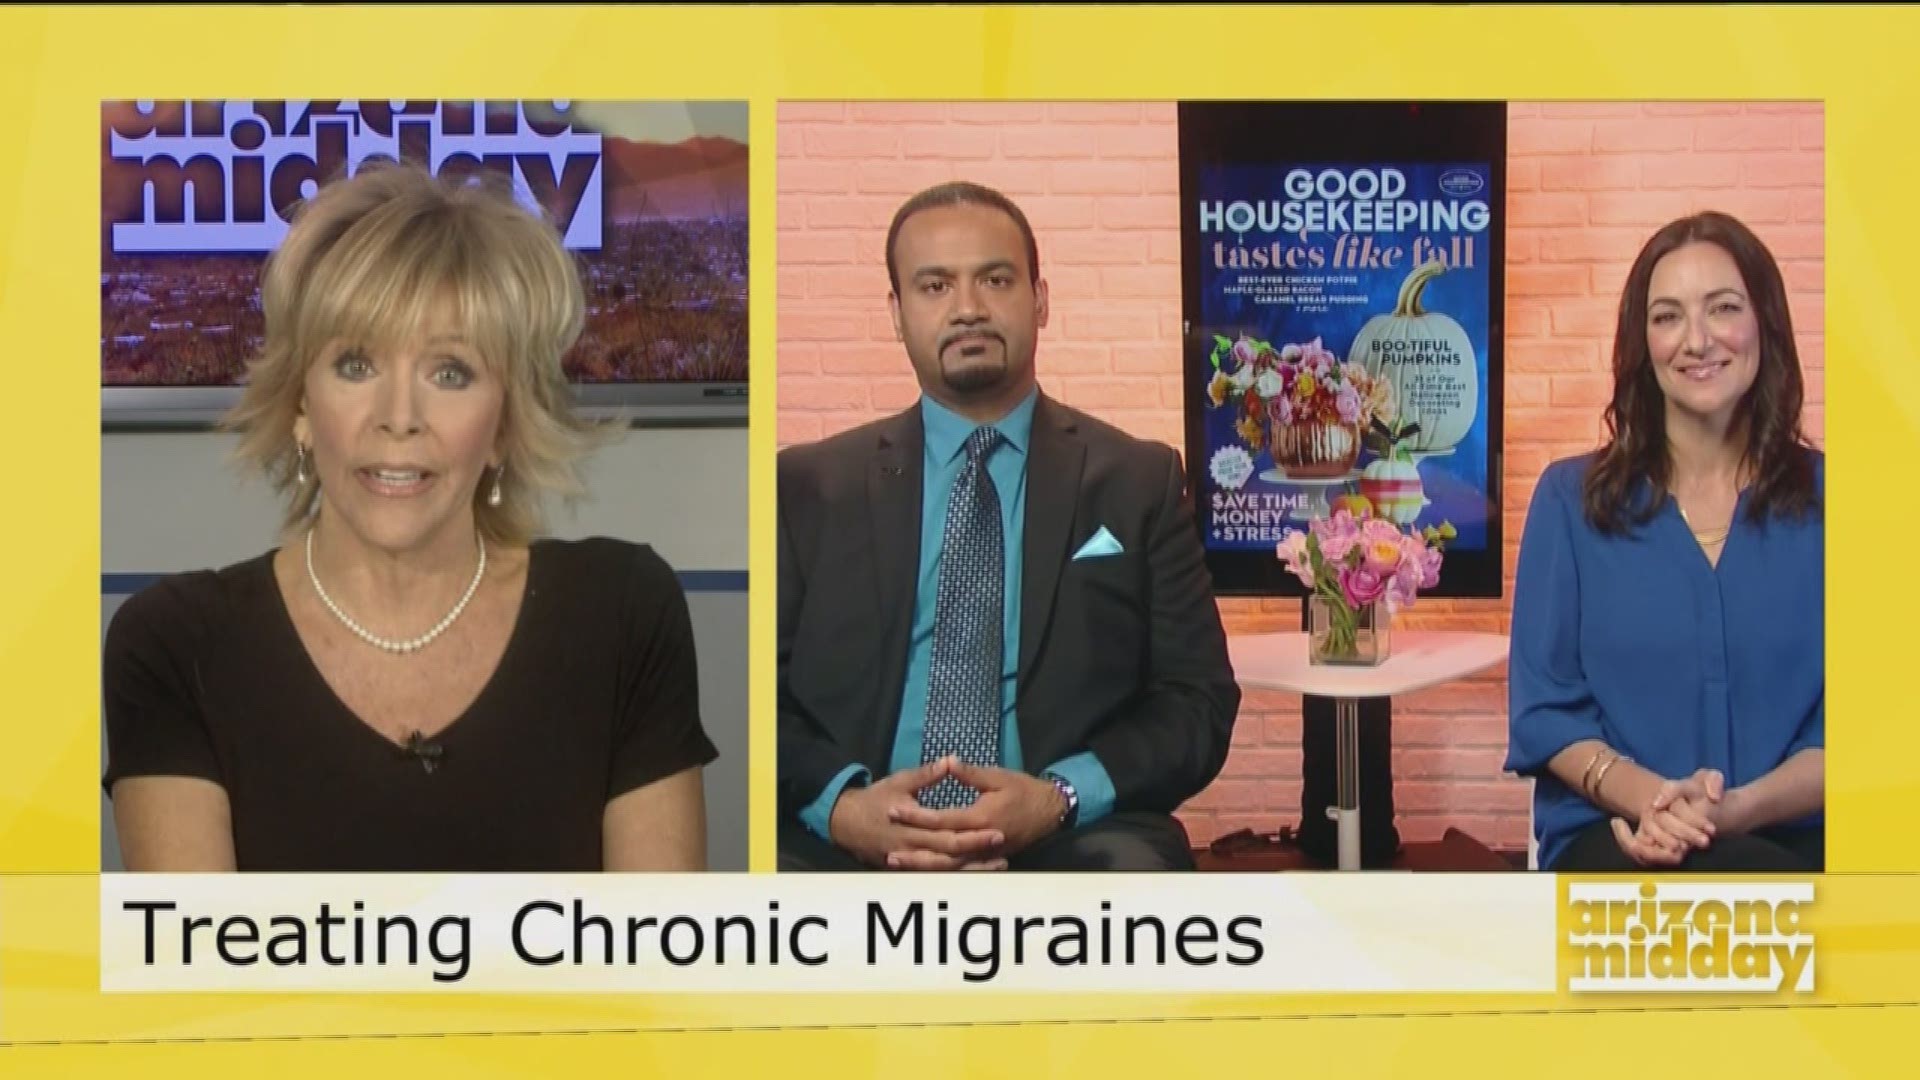 Dr. Paul G Mathew and Good Housekeeping's Laurie Jennings gives us advice on how to treat chronic migraines.